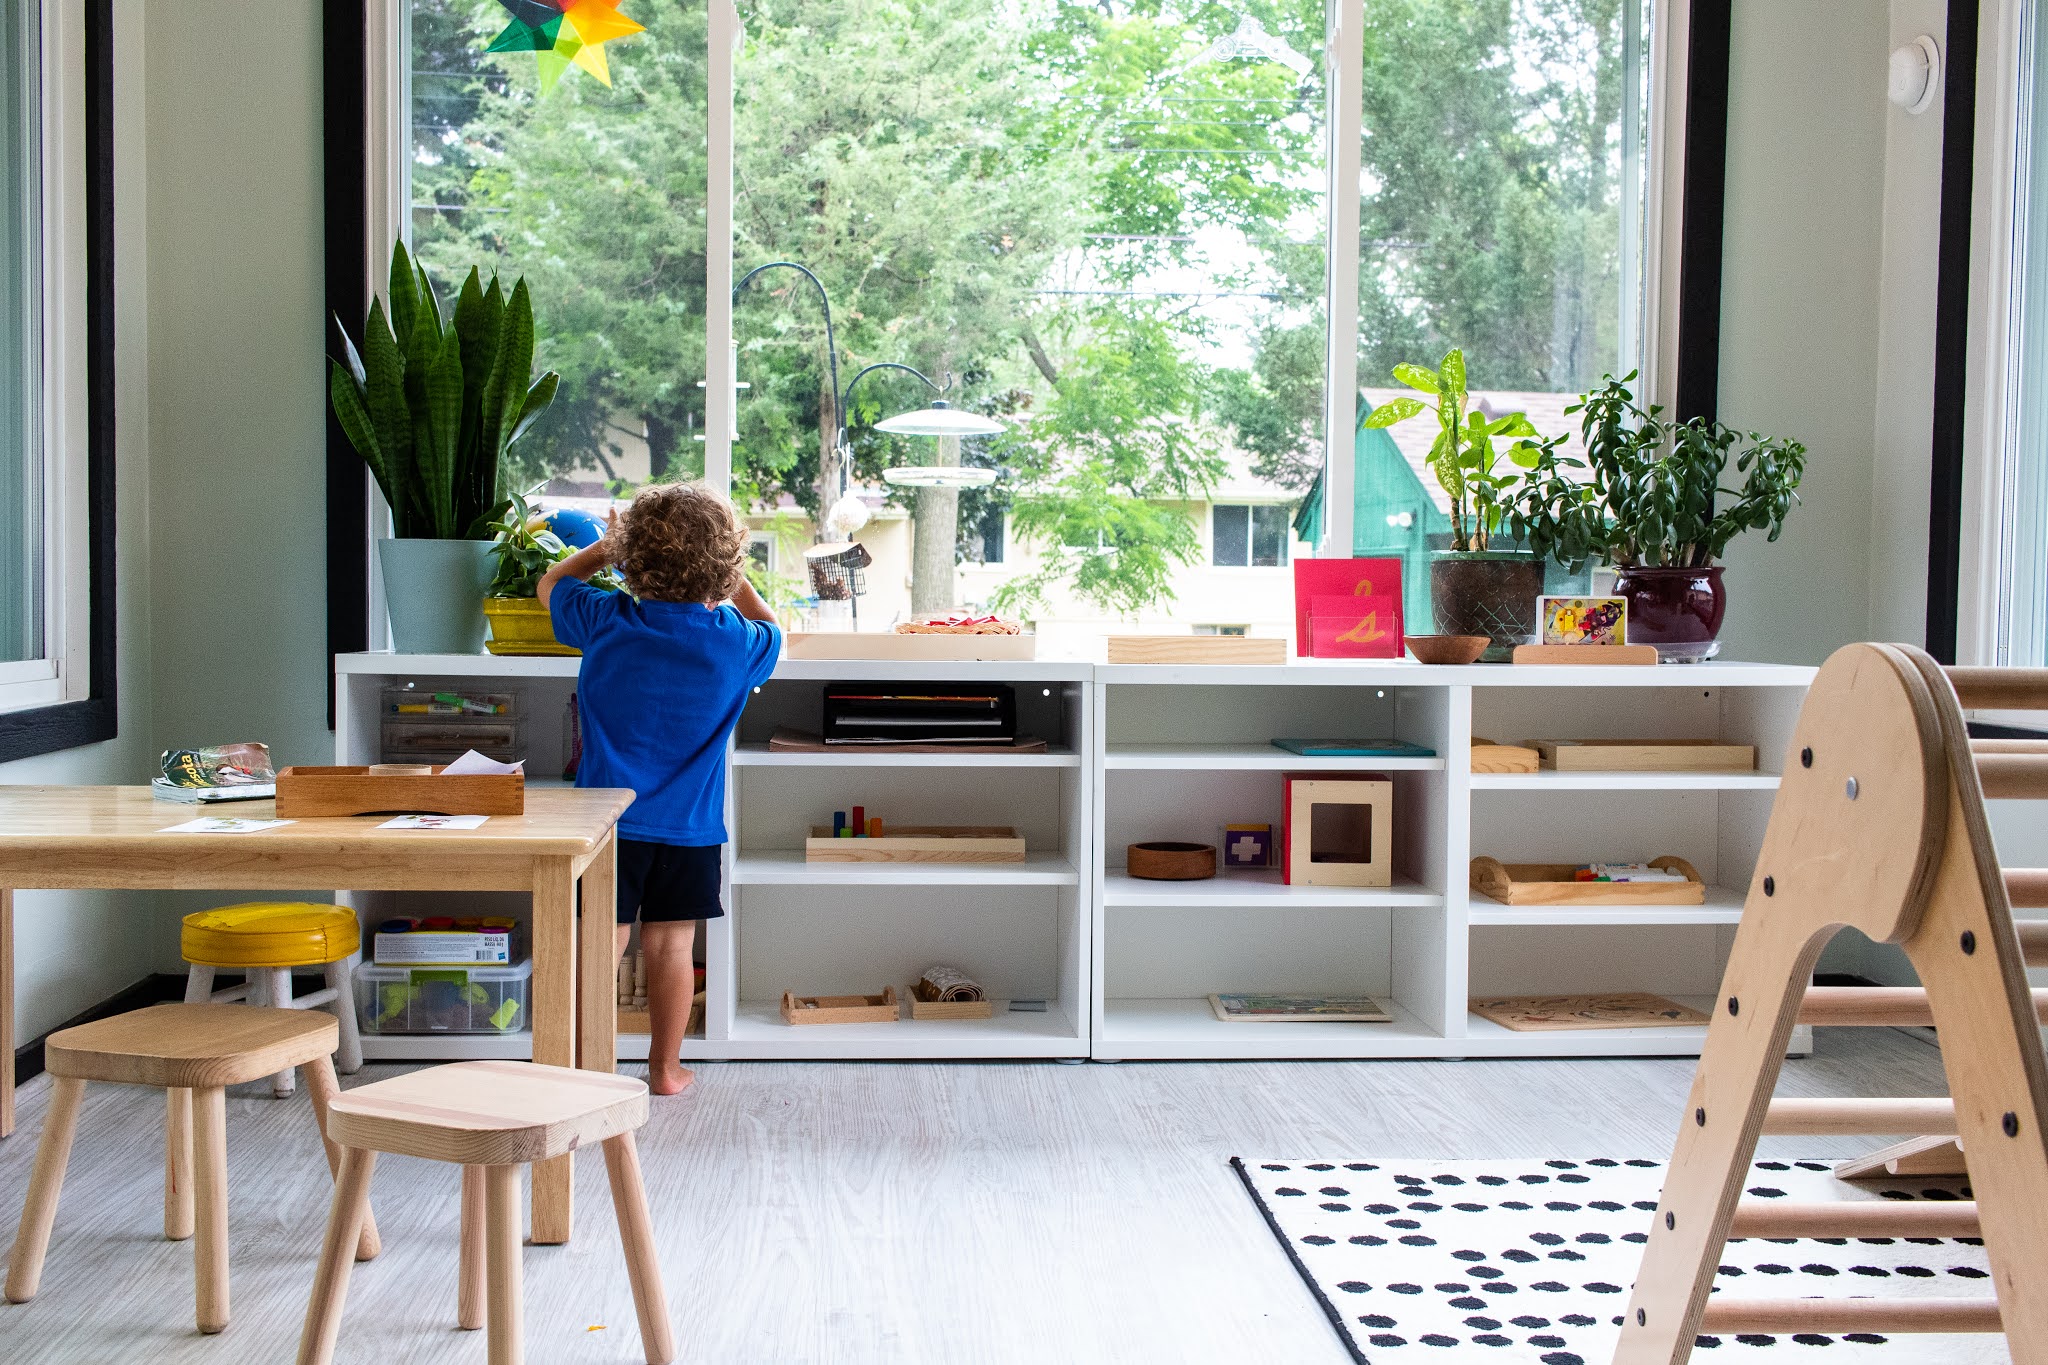 A catalogue of shelves for your Montessori home. If you are getting started with Montessori, these are great options to consider to prepare a space.